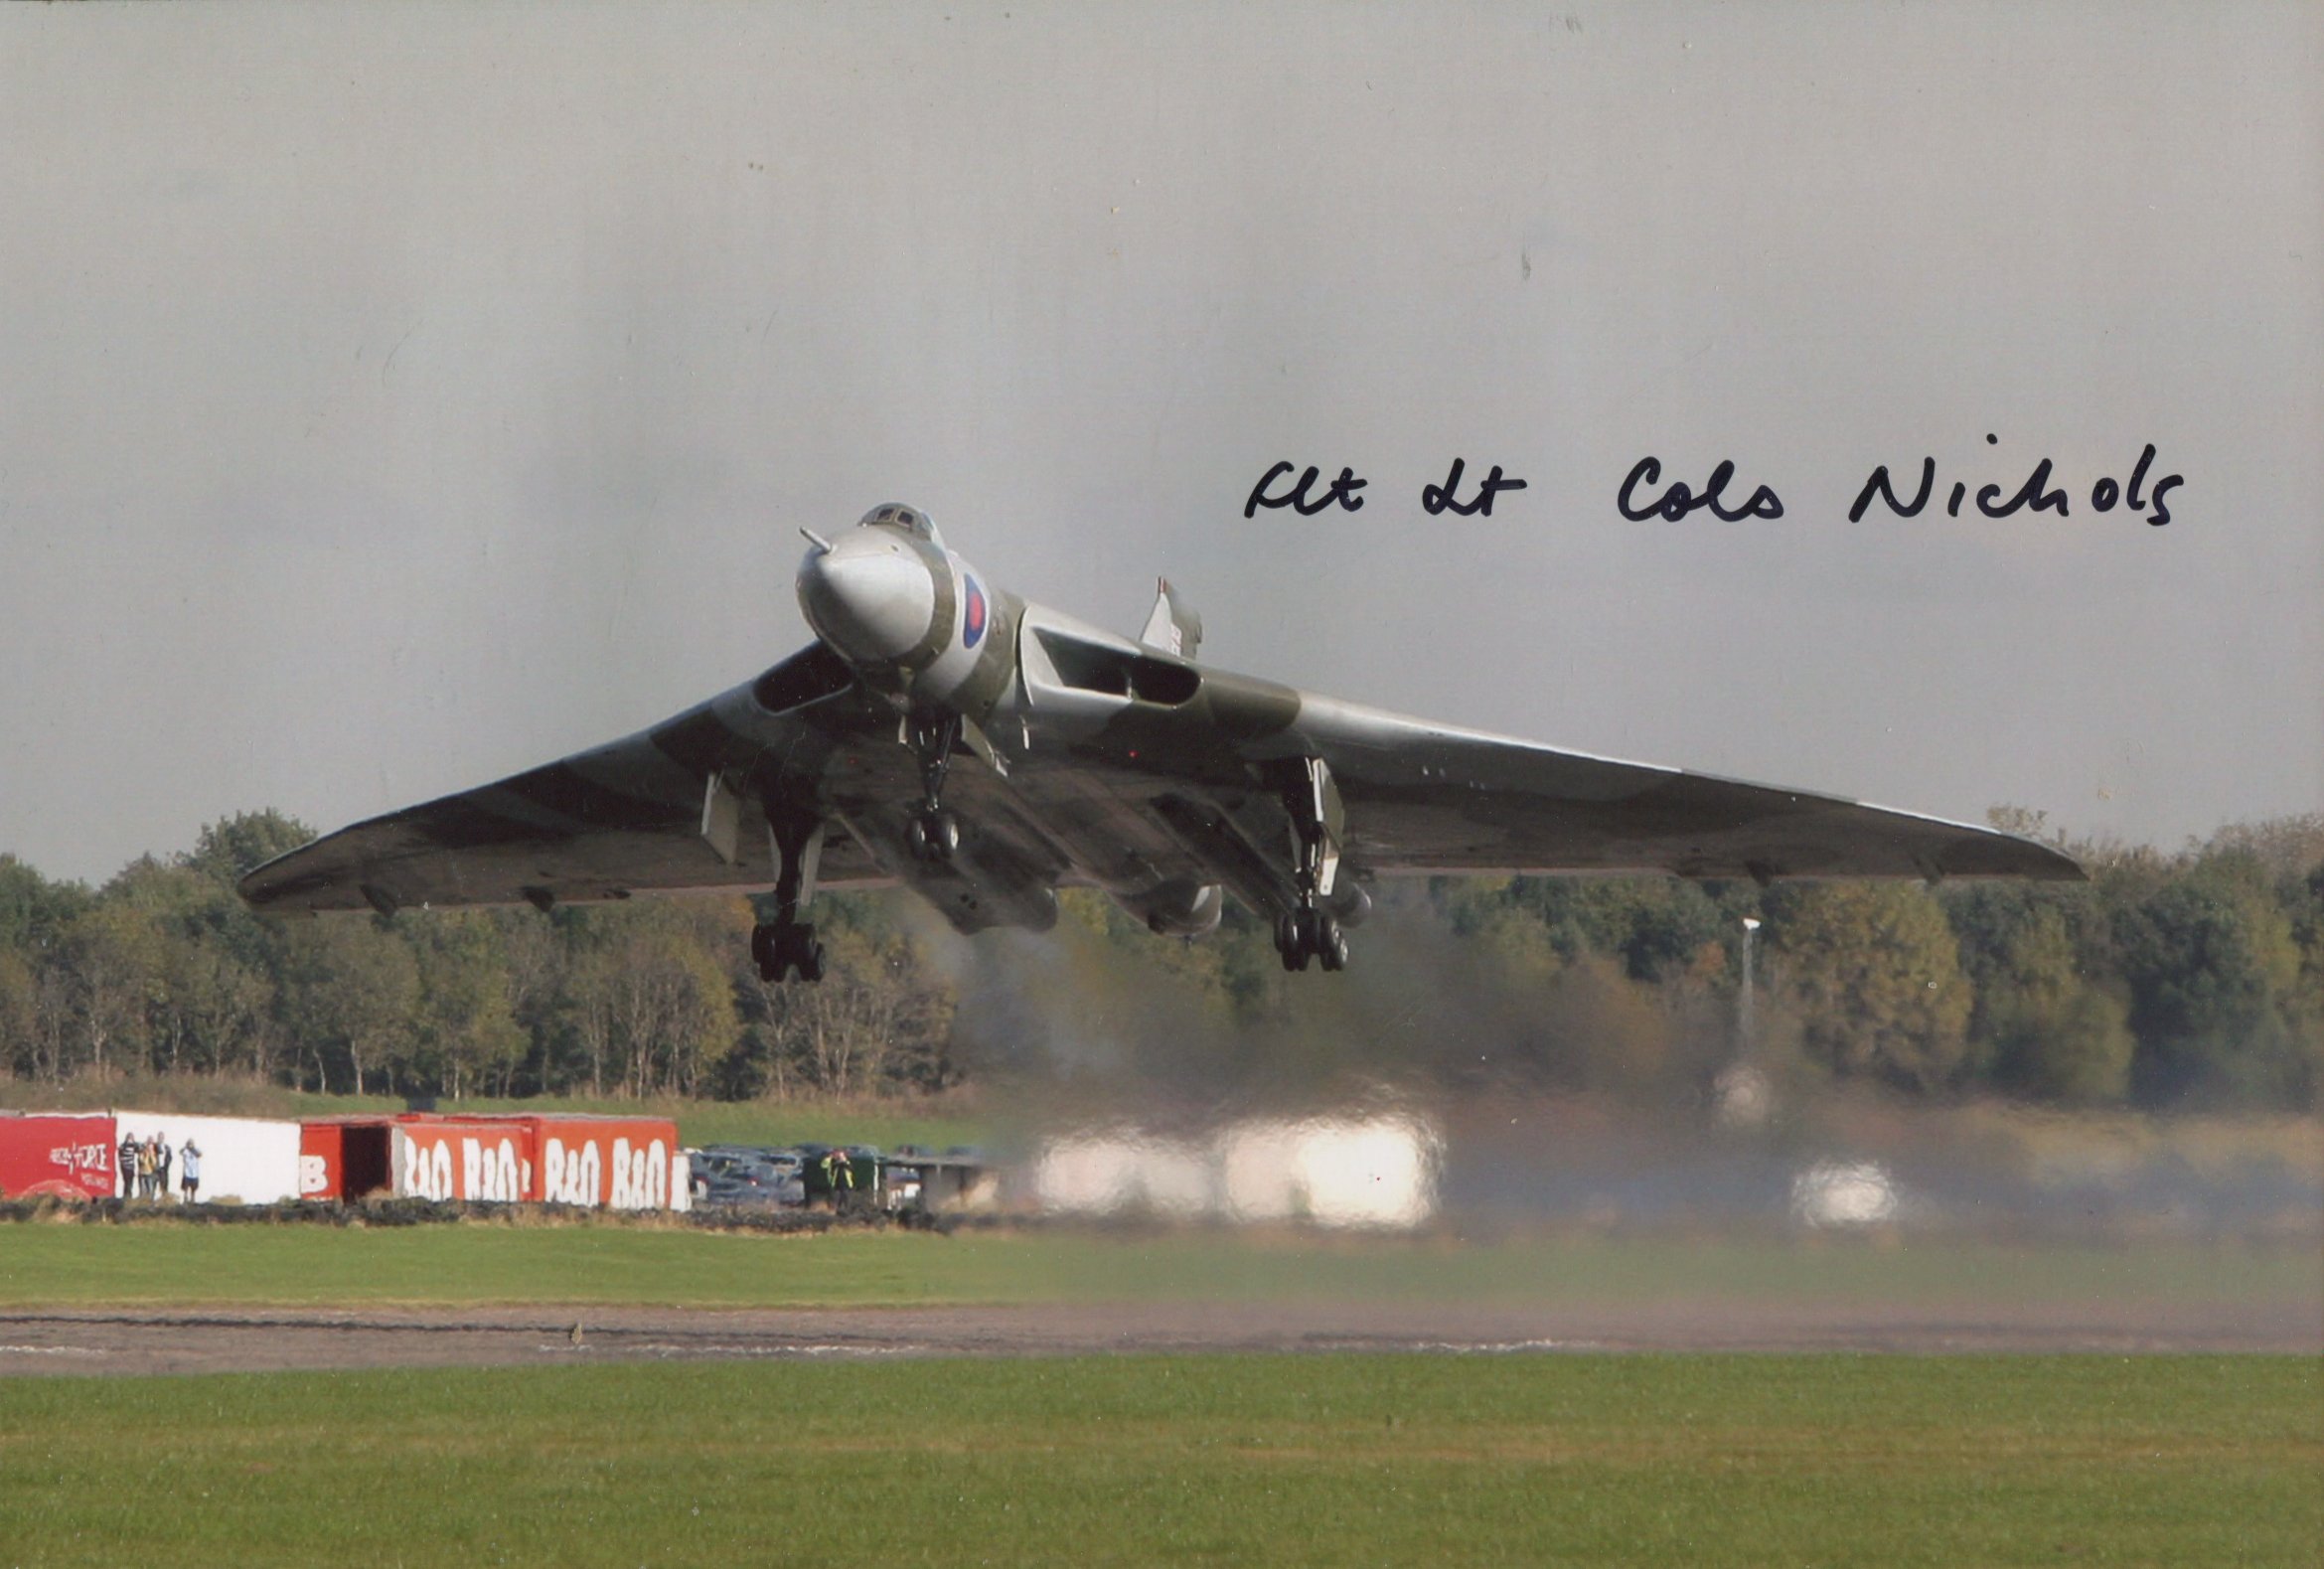 617 Squadron RAF Vulcan Bomber pilot 8x12 photo signed by the late Flt Lt Colston Nichols who flew